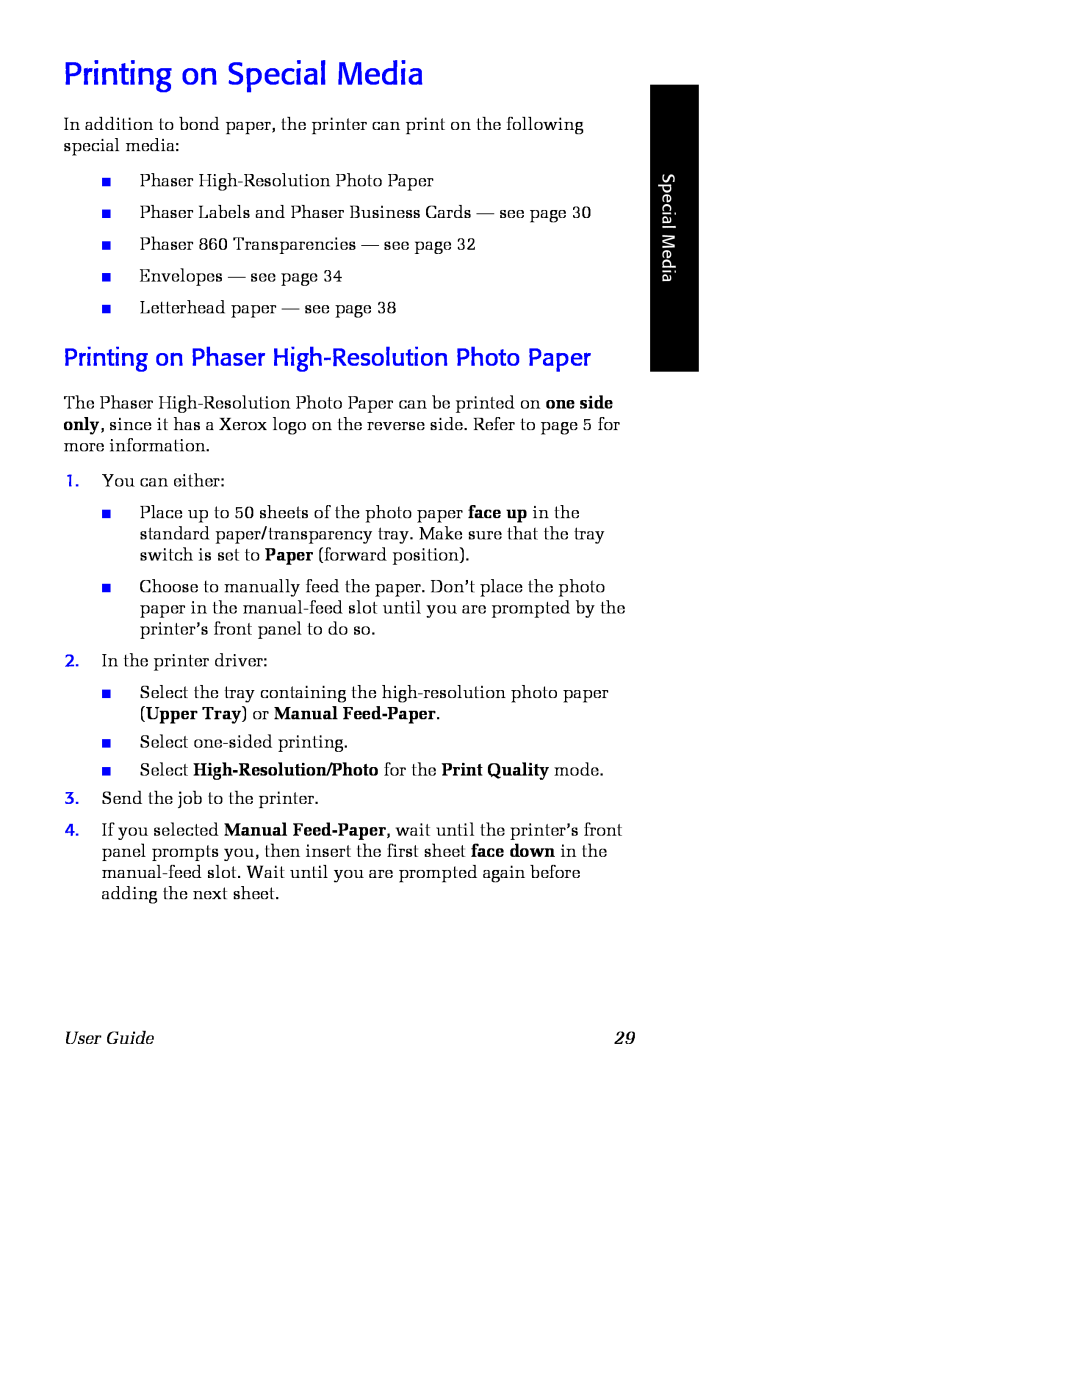 Xerox Phaser 860 manual Printing on Special Media, Printing on Phaser High-Resolution Photo Paper, User Guide 